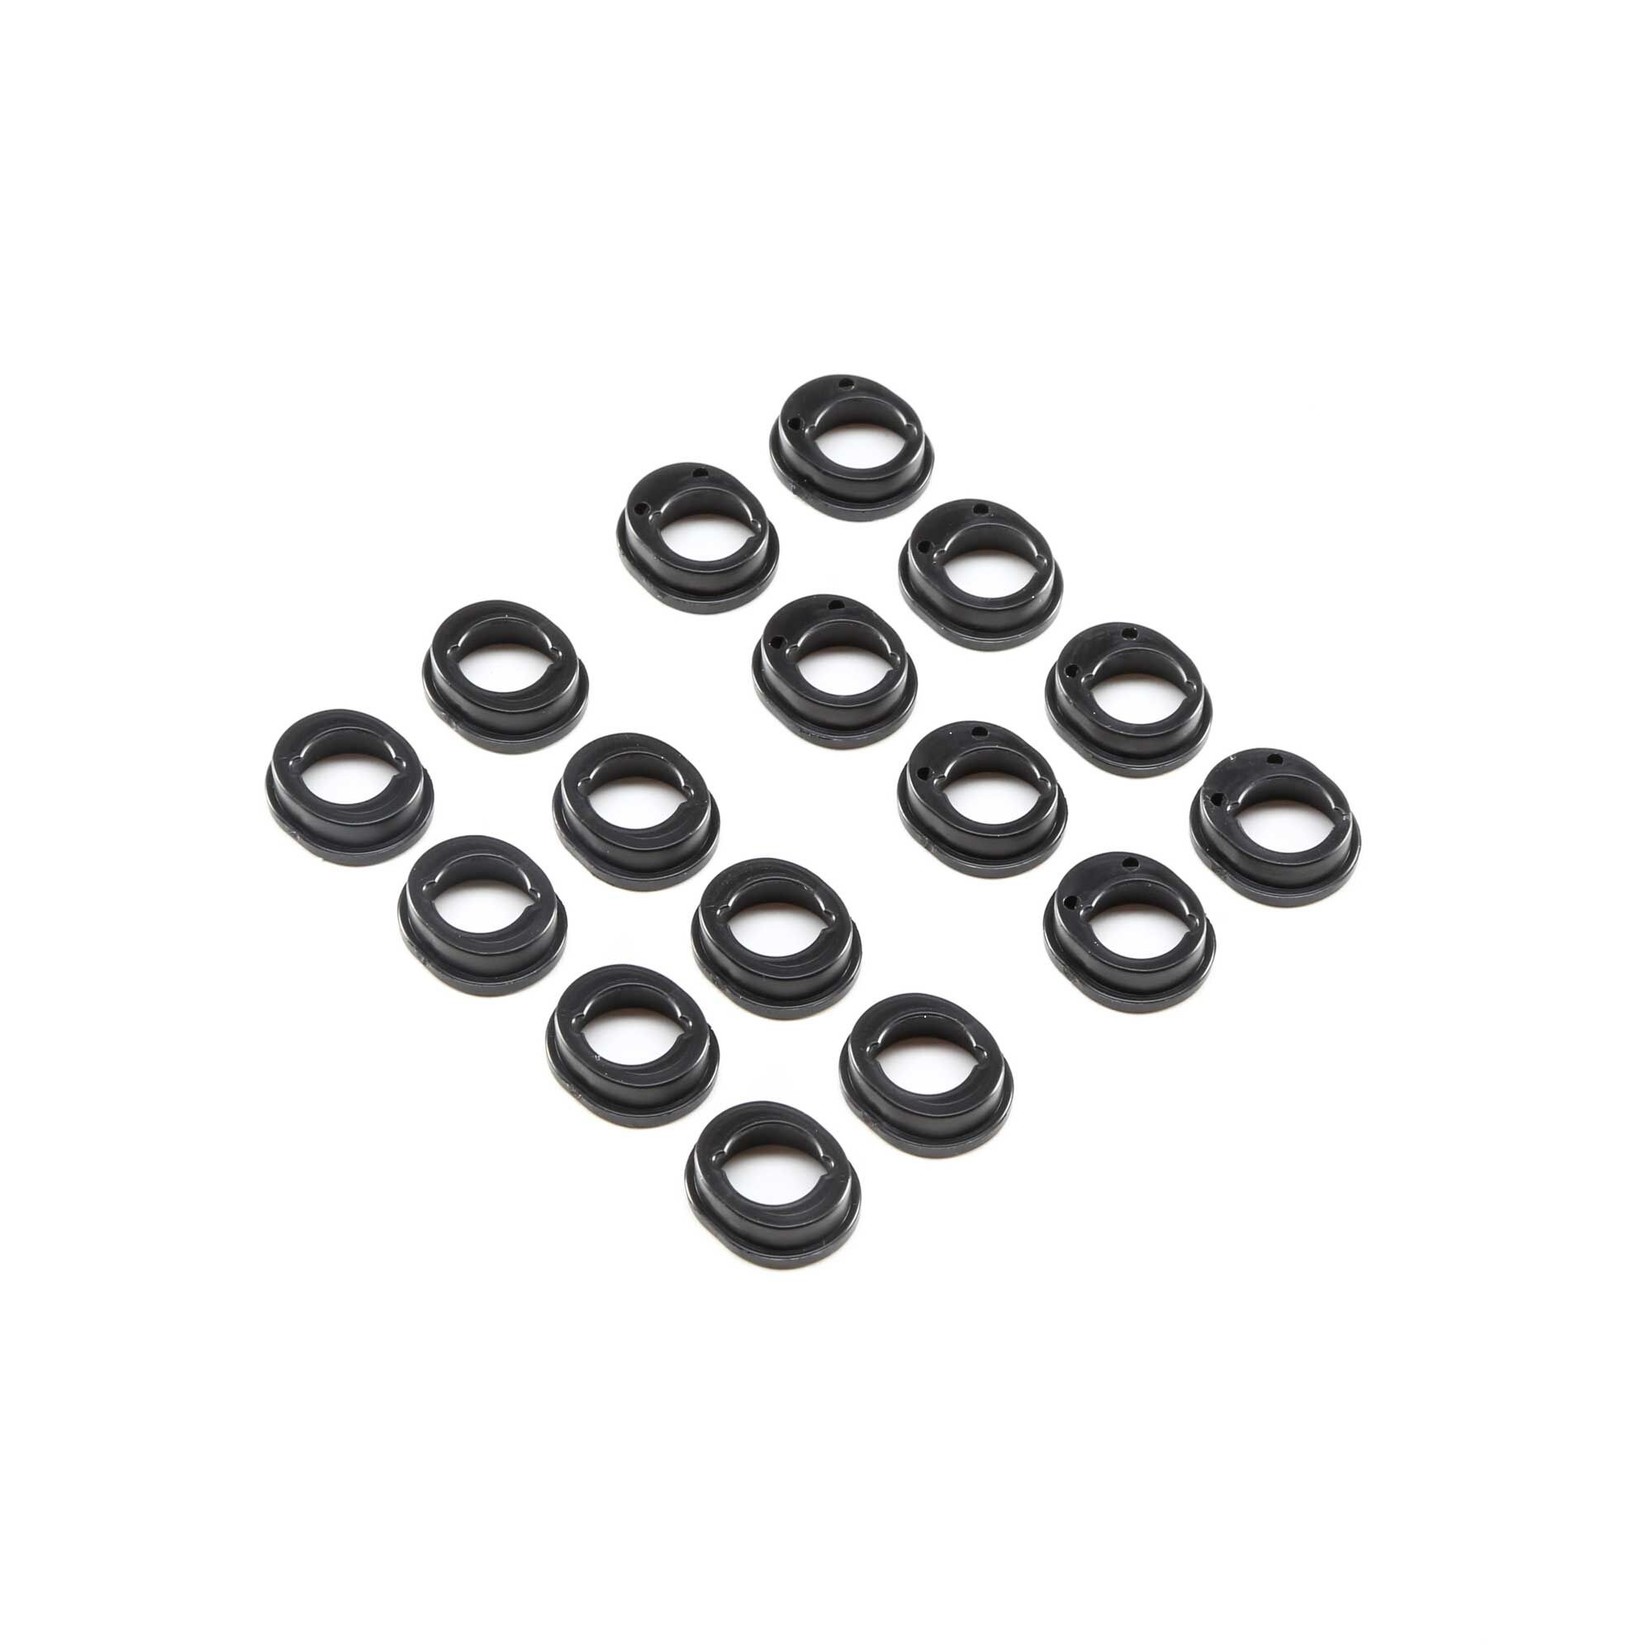 Team Losi Racing (TLR) Spindle Trail Inserts 2, 3, 4mm: All 22